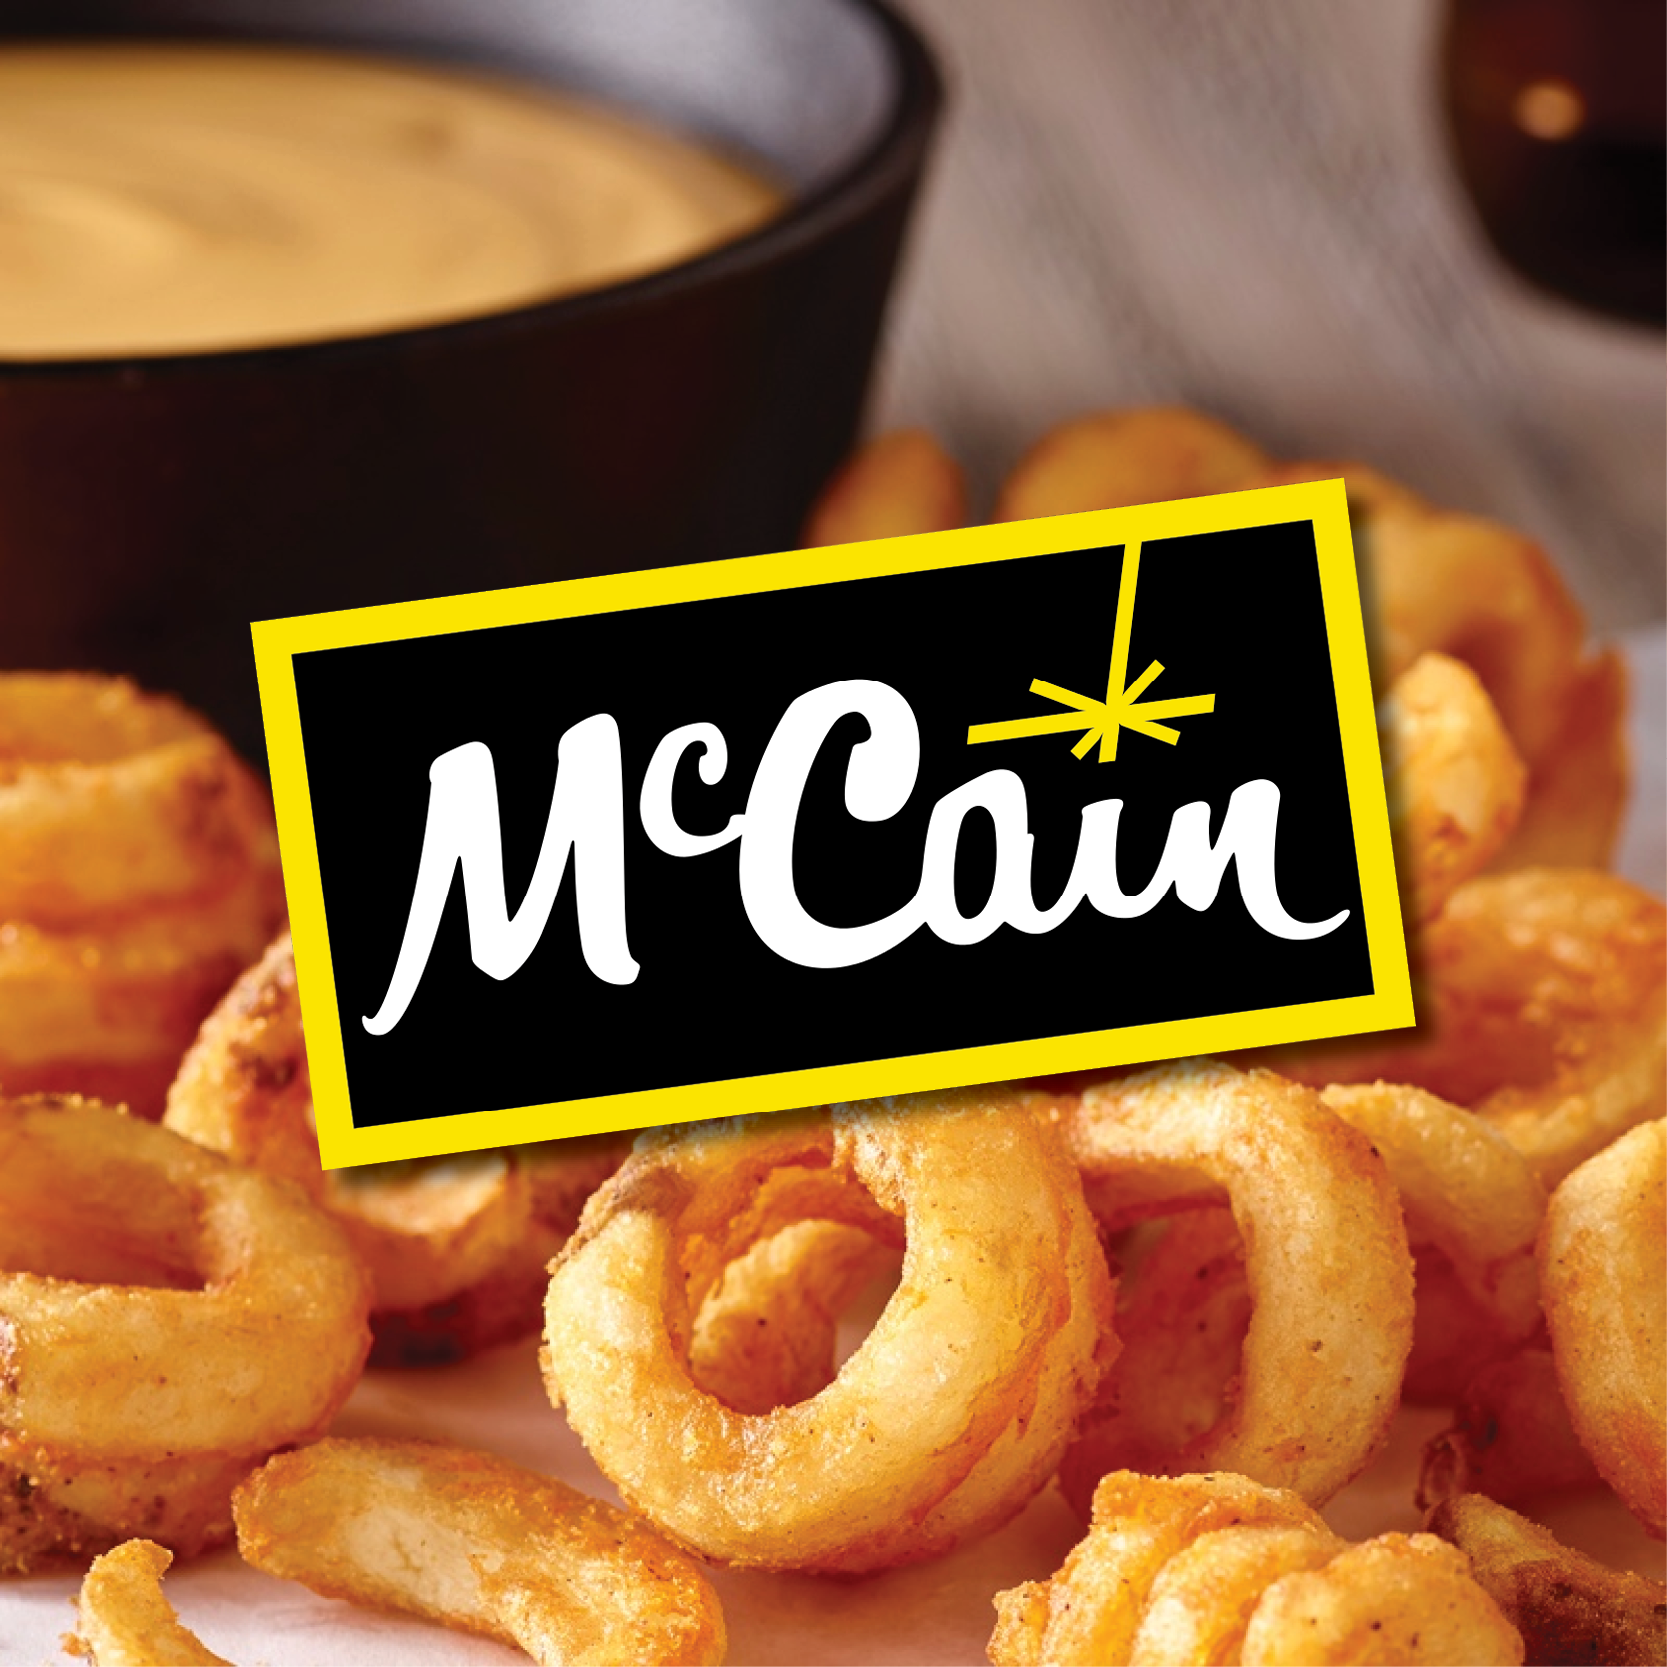 McCain Potato Products French Fries and appetizers thumbnail